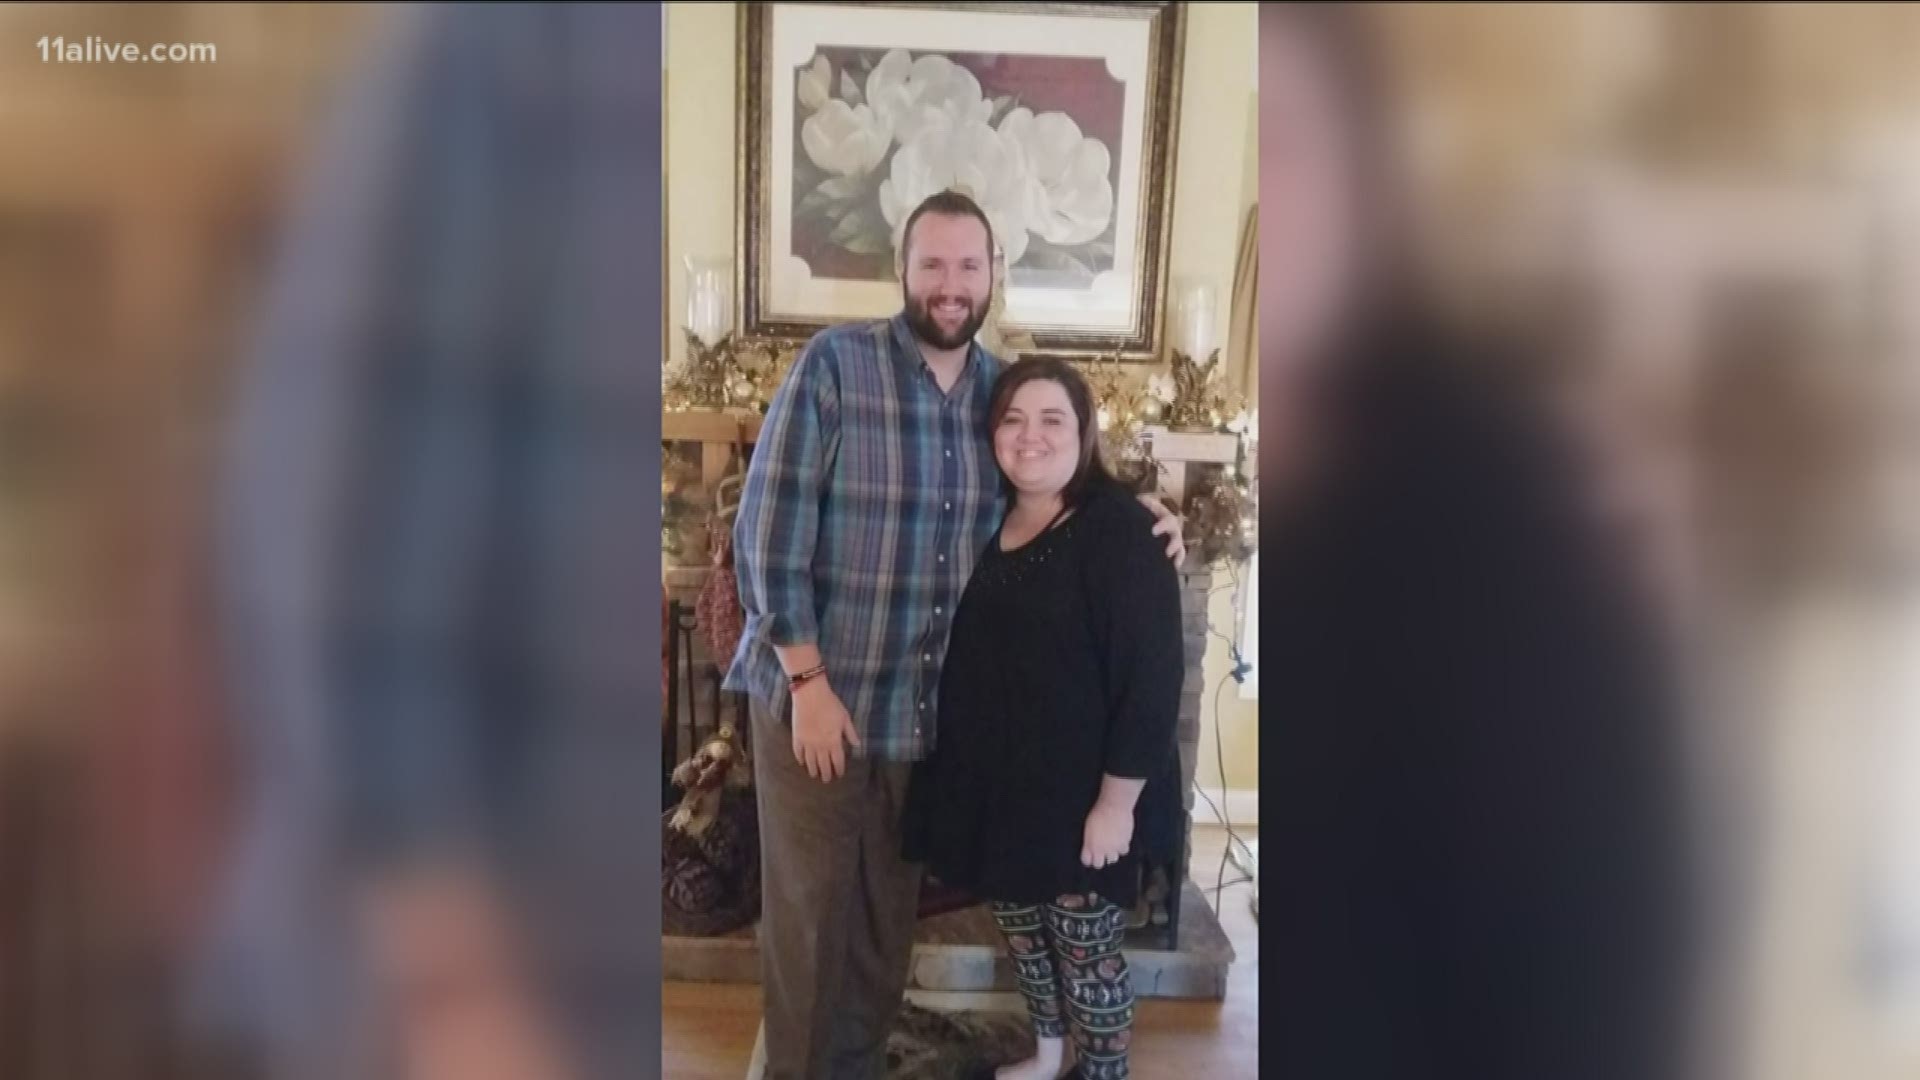 Kyle and April Abernathy are finally home after battling coronavirus.